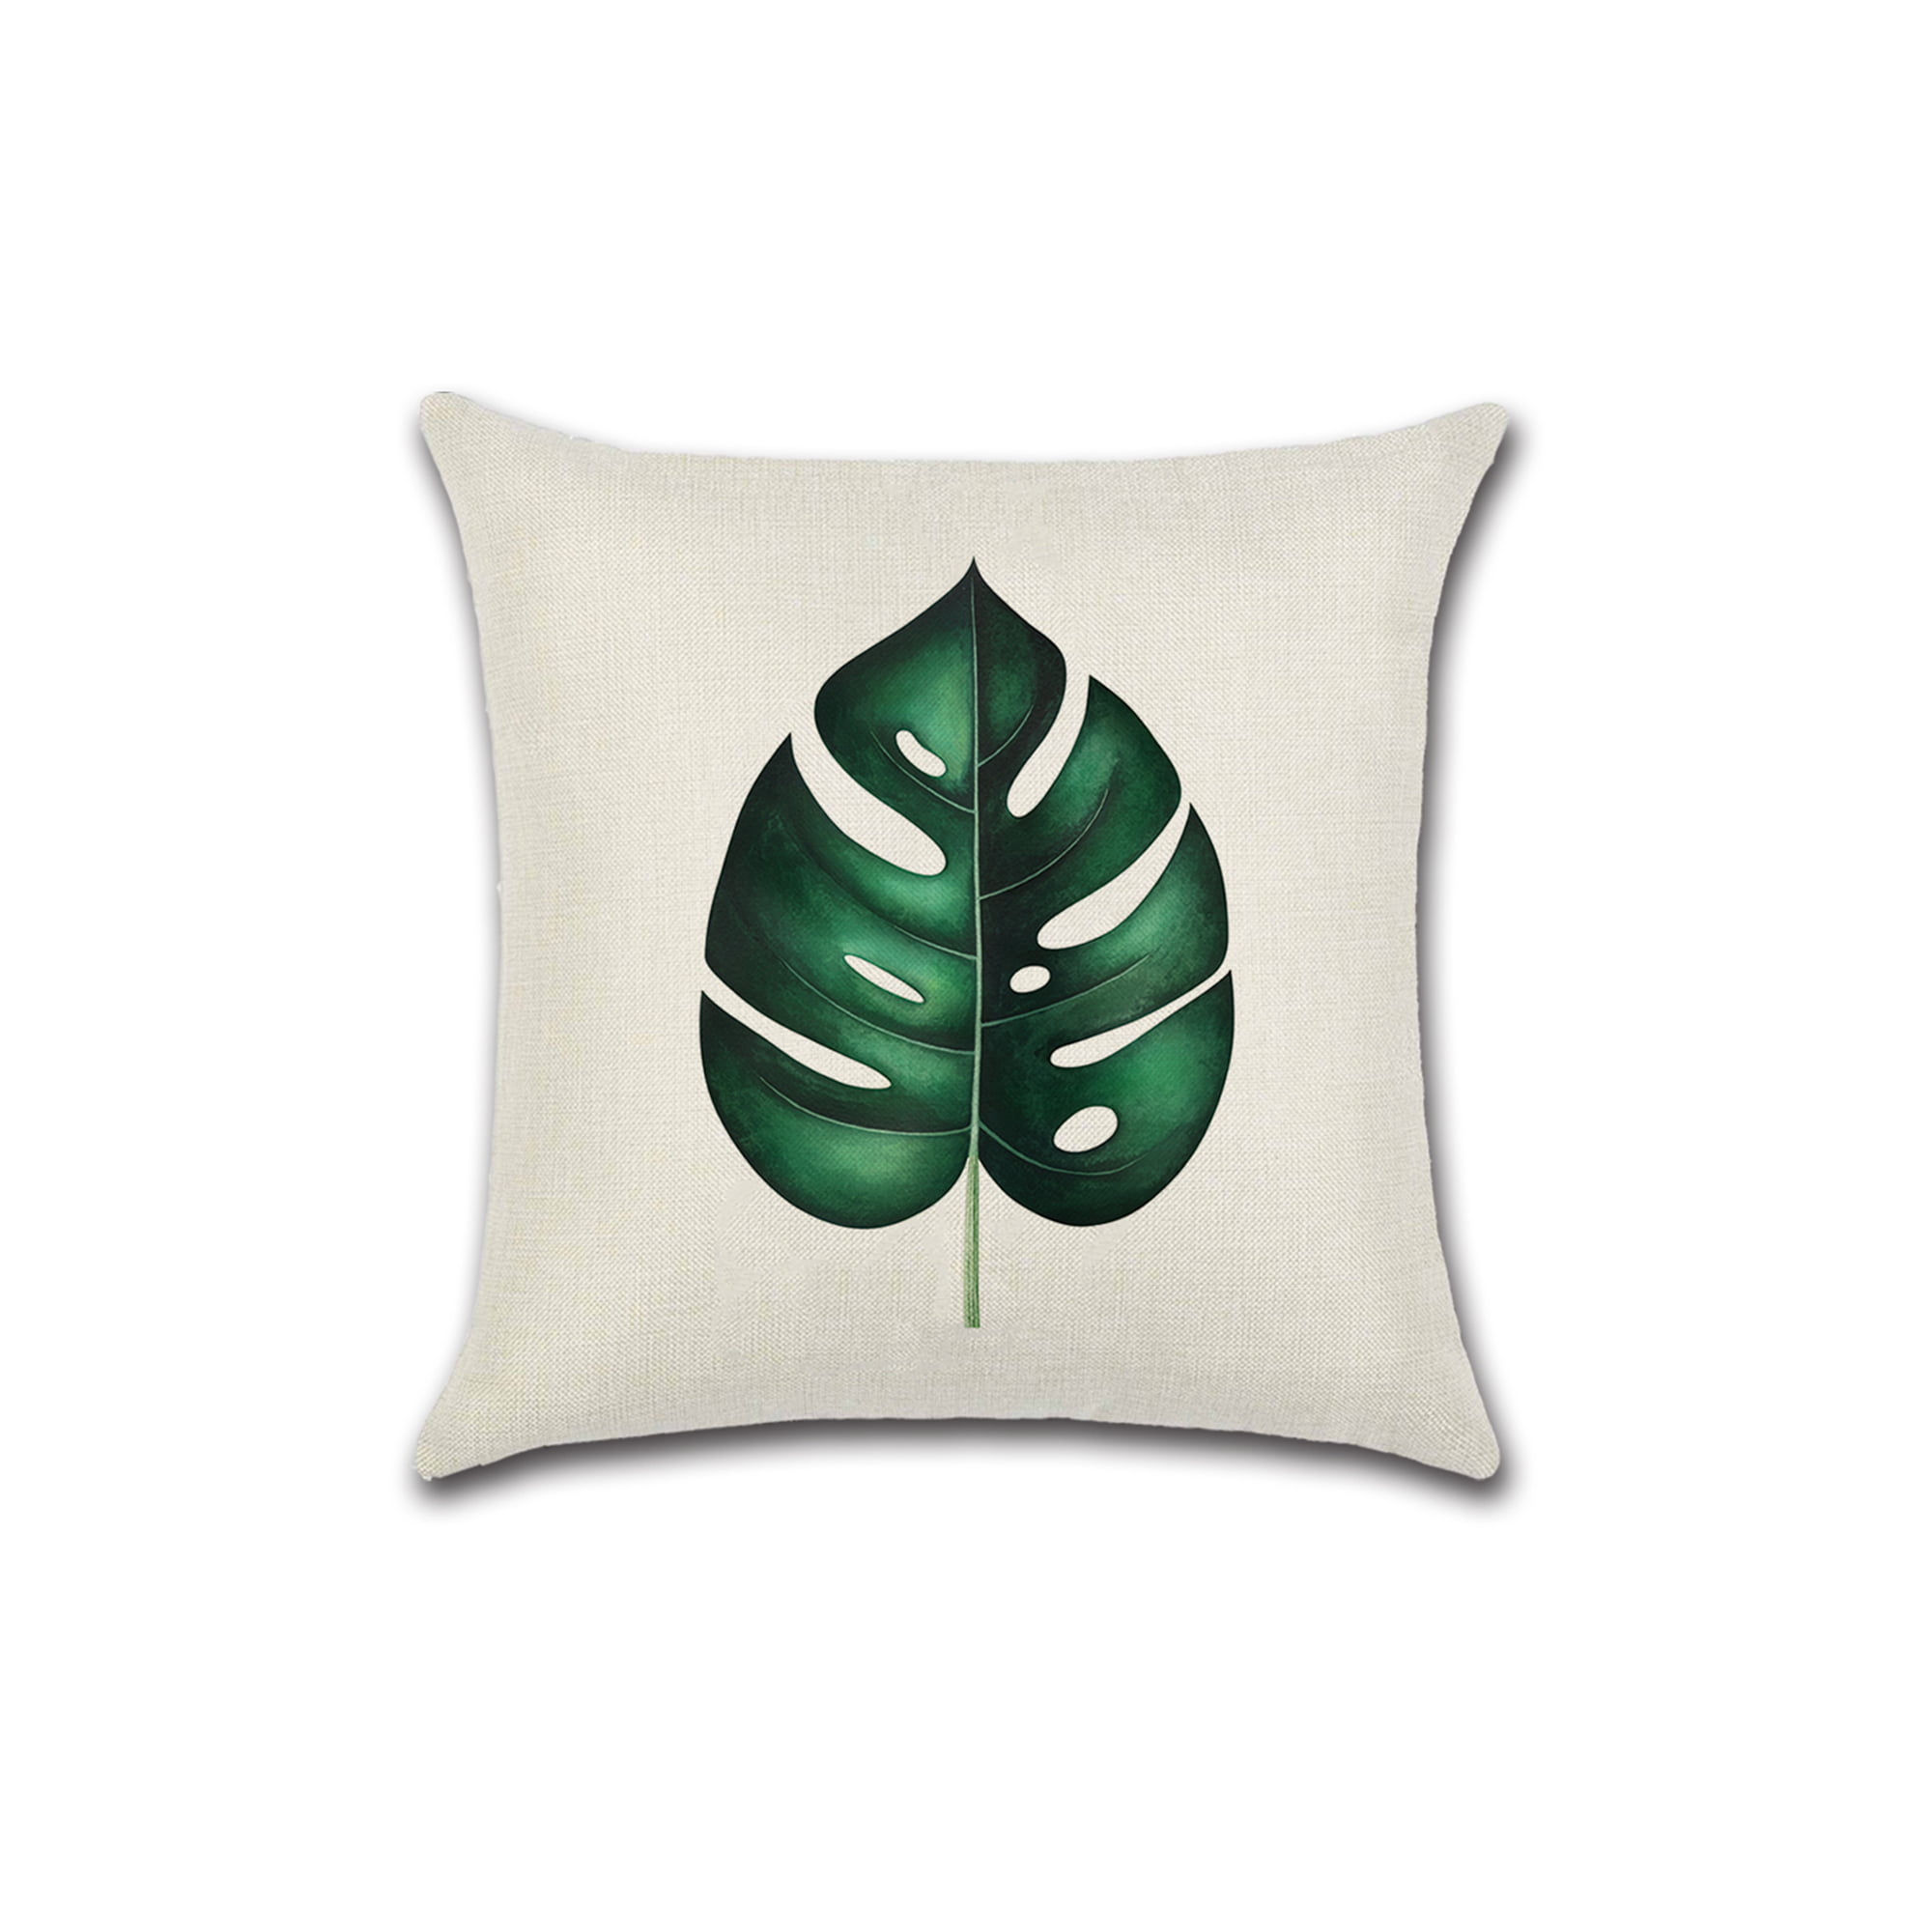 Monstera Leaf Pillow Case, Green Leaves Pillow Covers, Palm Leaf Printed  Cushion Case, Giant Leaves Spring Decorative Pillows, New Home Gift 